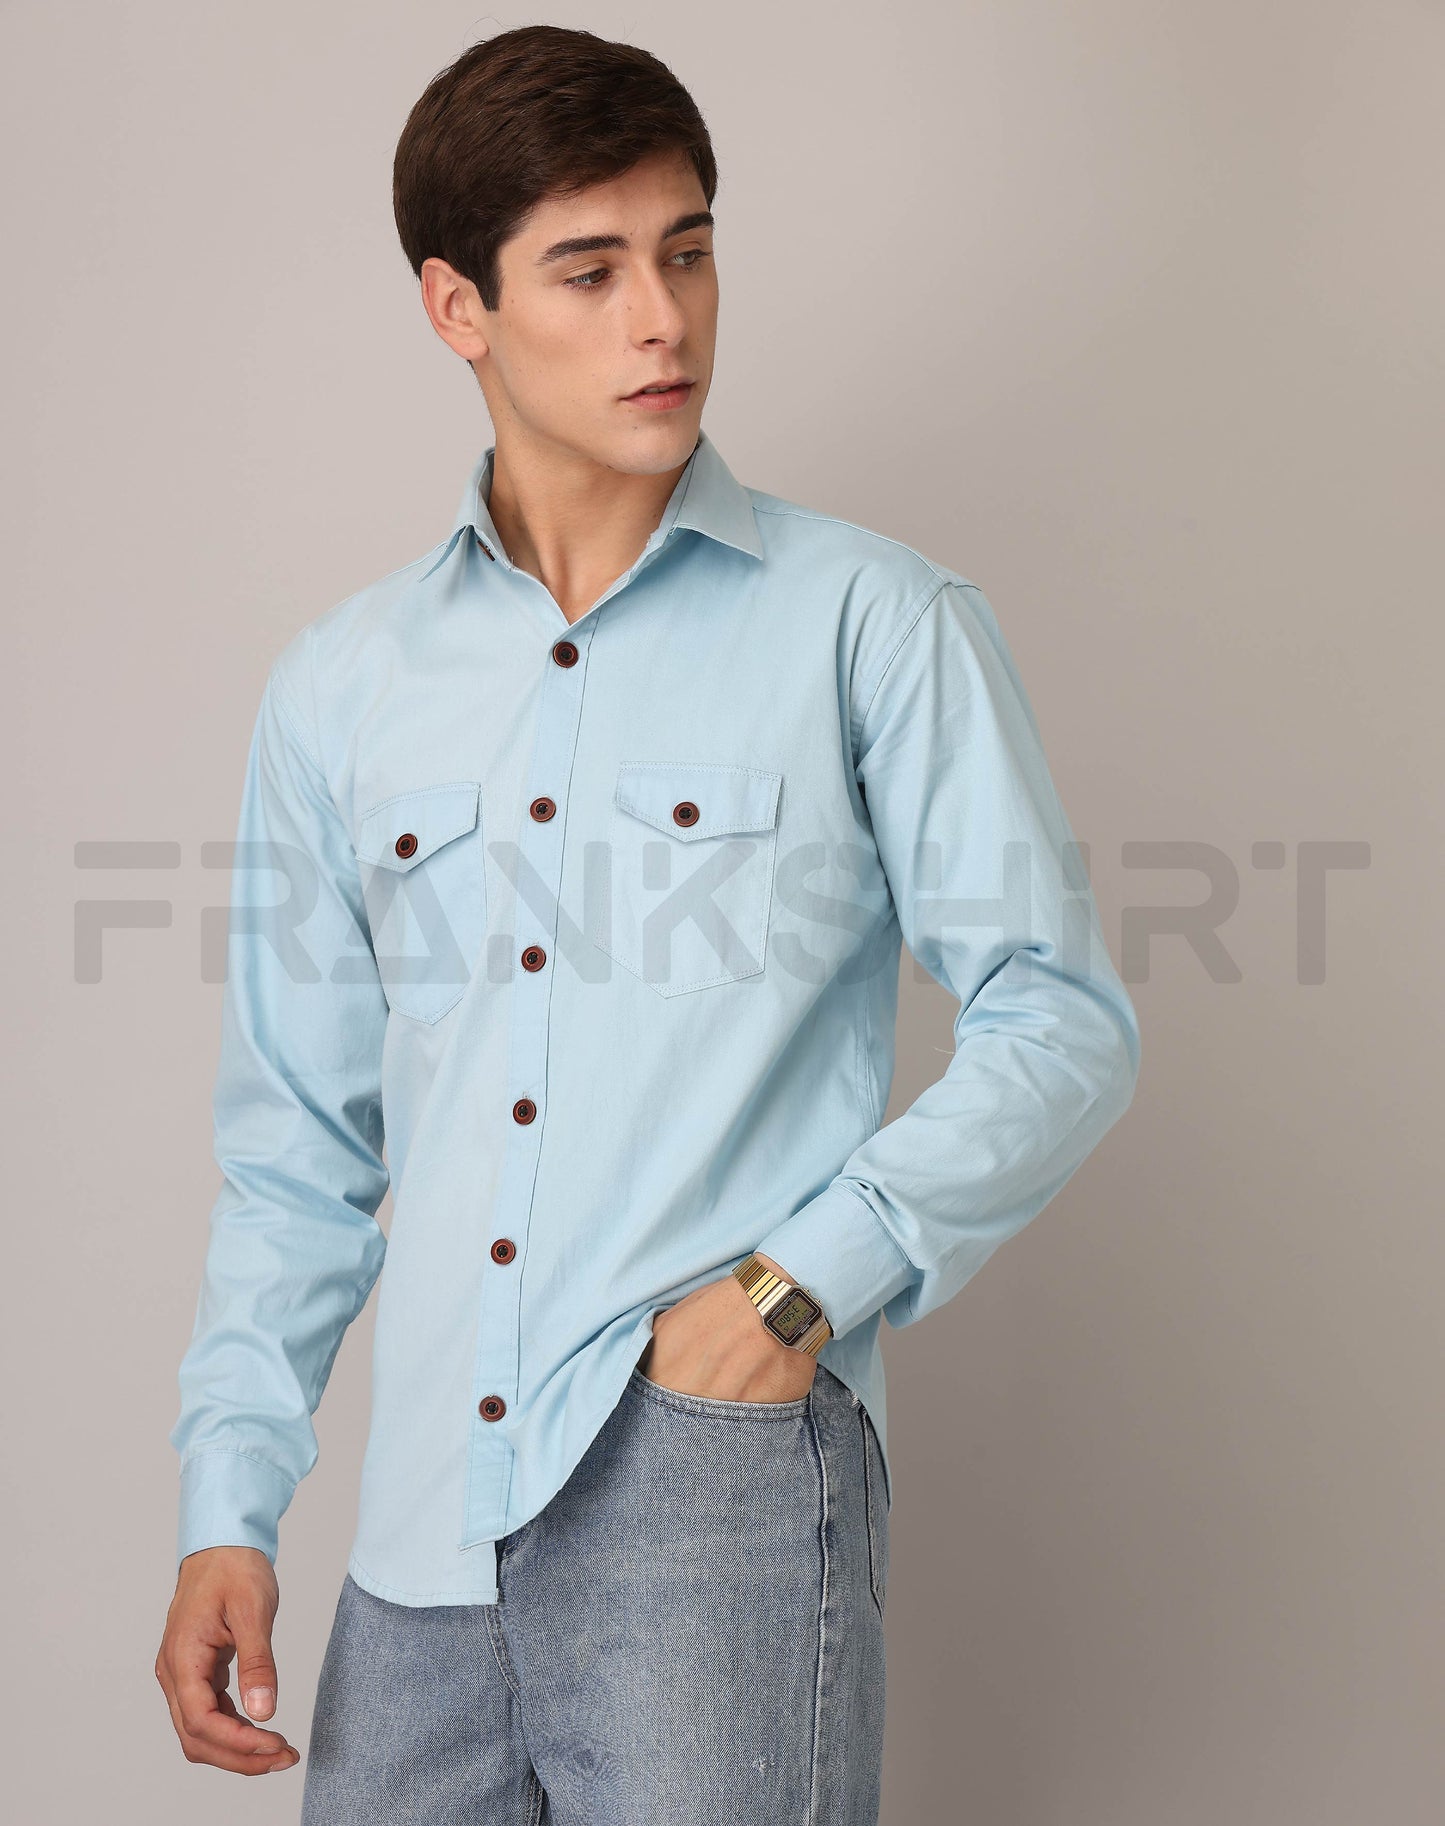 Frankshirt Double Pocket Light Blue Solid Tailored Fit Cotton Casual Shirt for Man